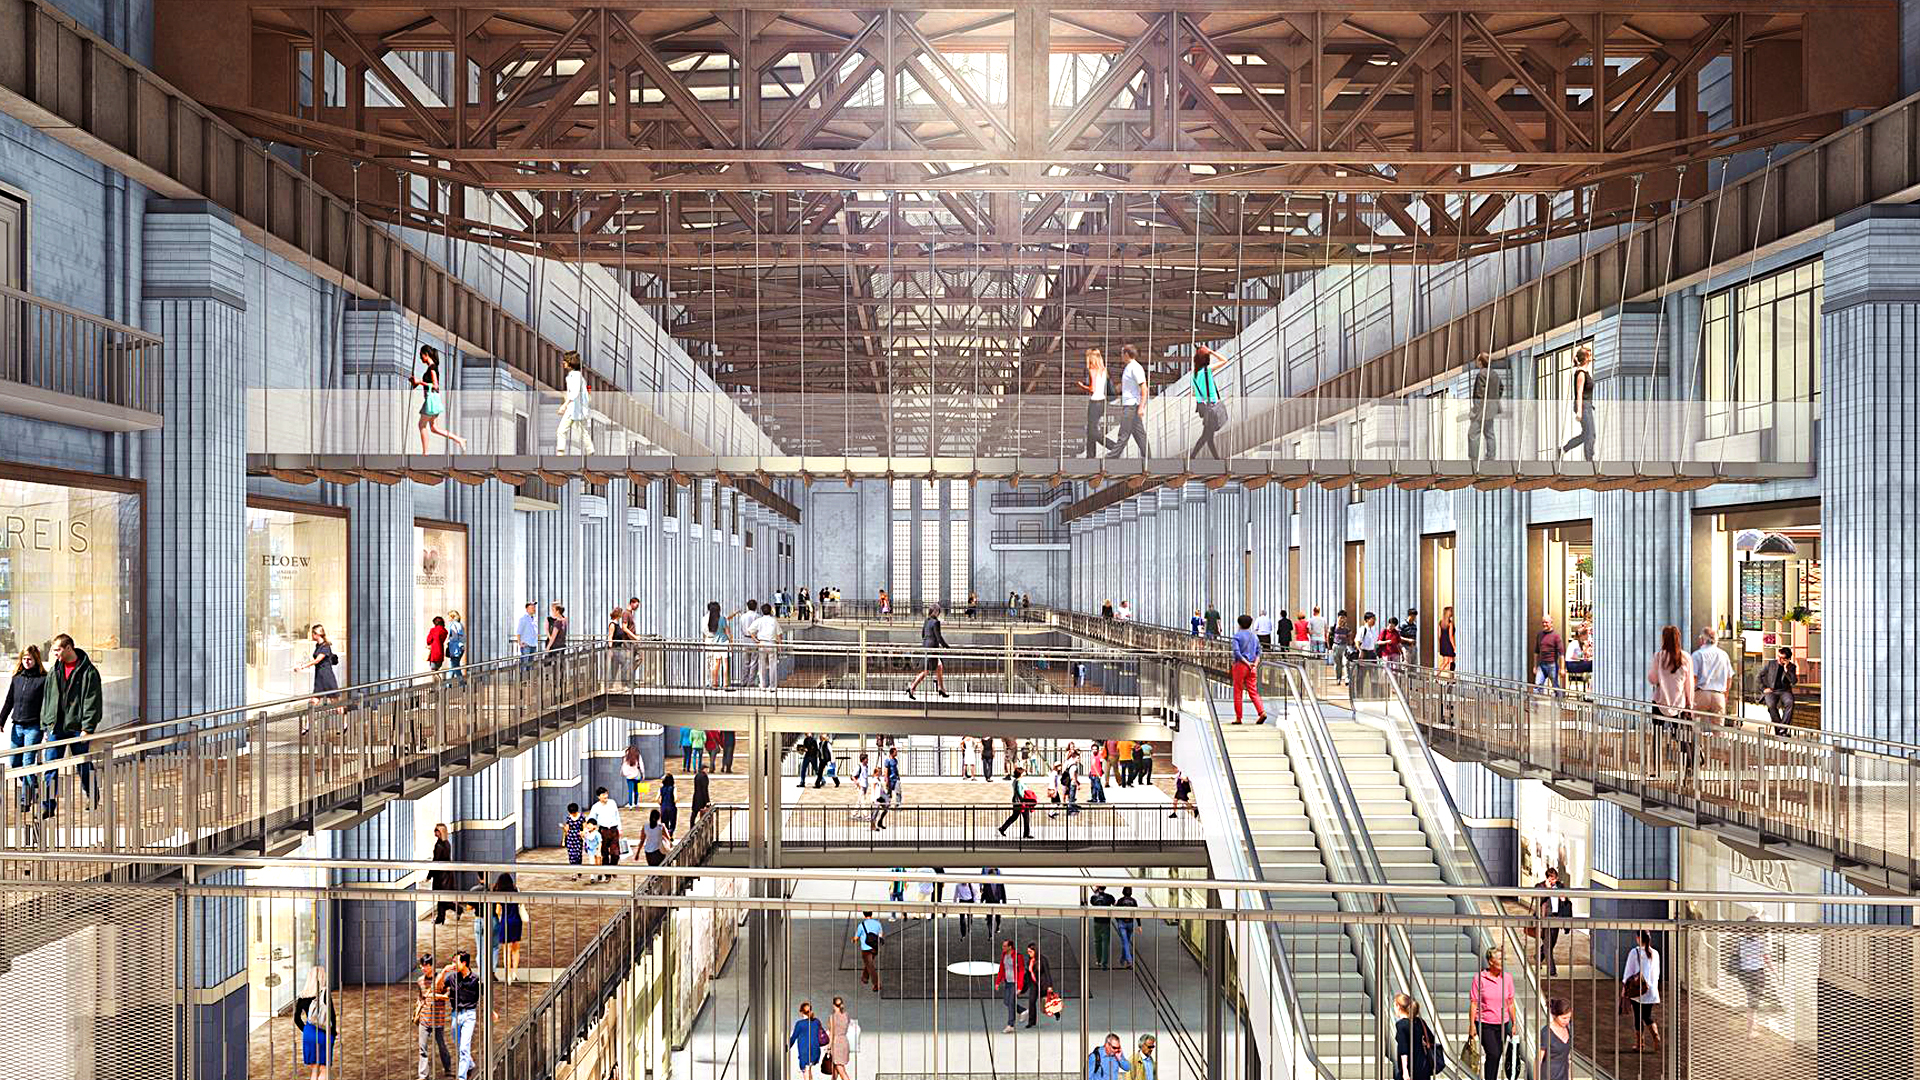 This shopping hall, in one of the turbine halls built in the 1930s, will feature balconies, walkways and bronzed shopfronts. Photos:  Battersea Power Station Development